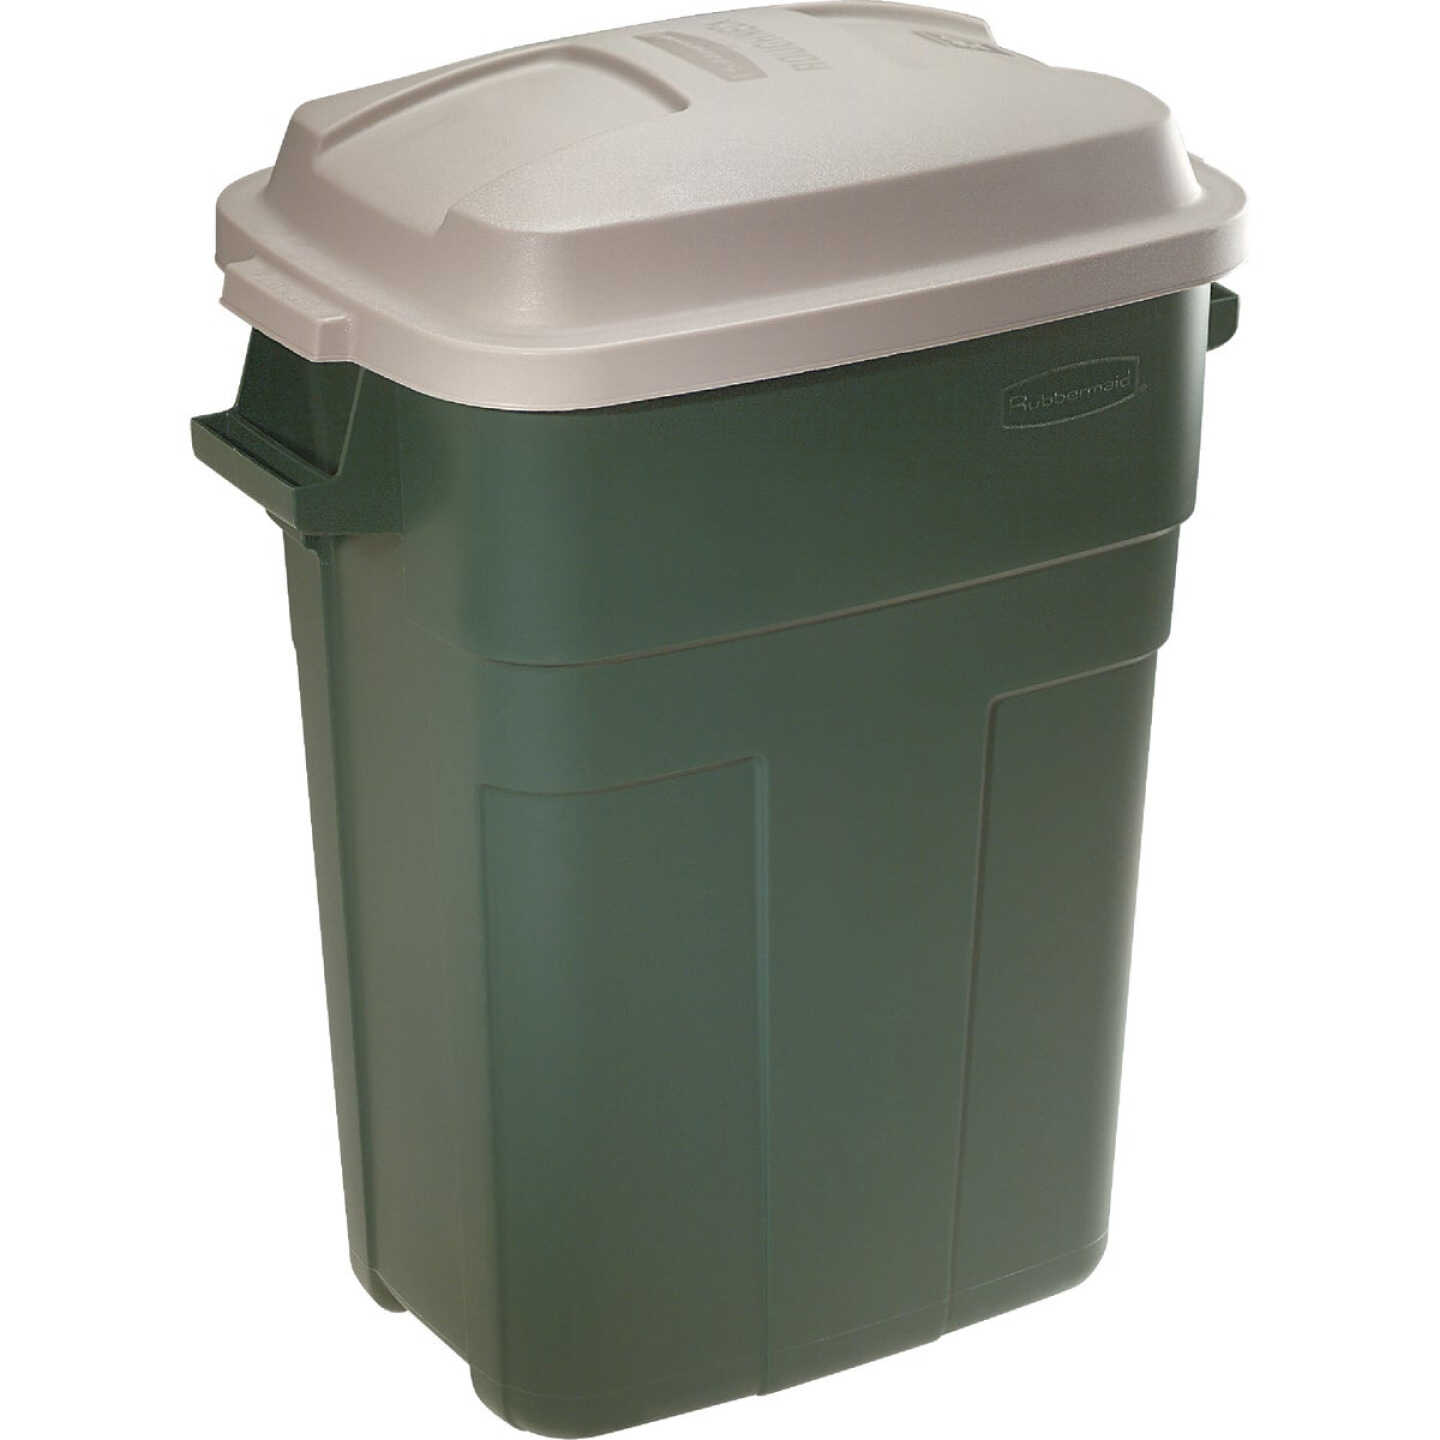 Rubbermaid Roughneck 32 Gallon Garbage Can